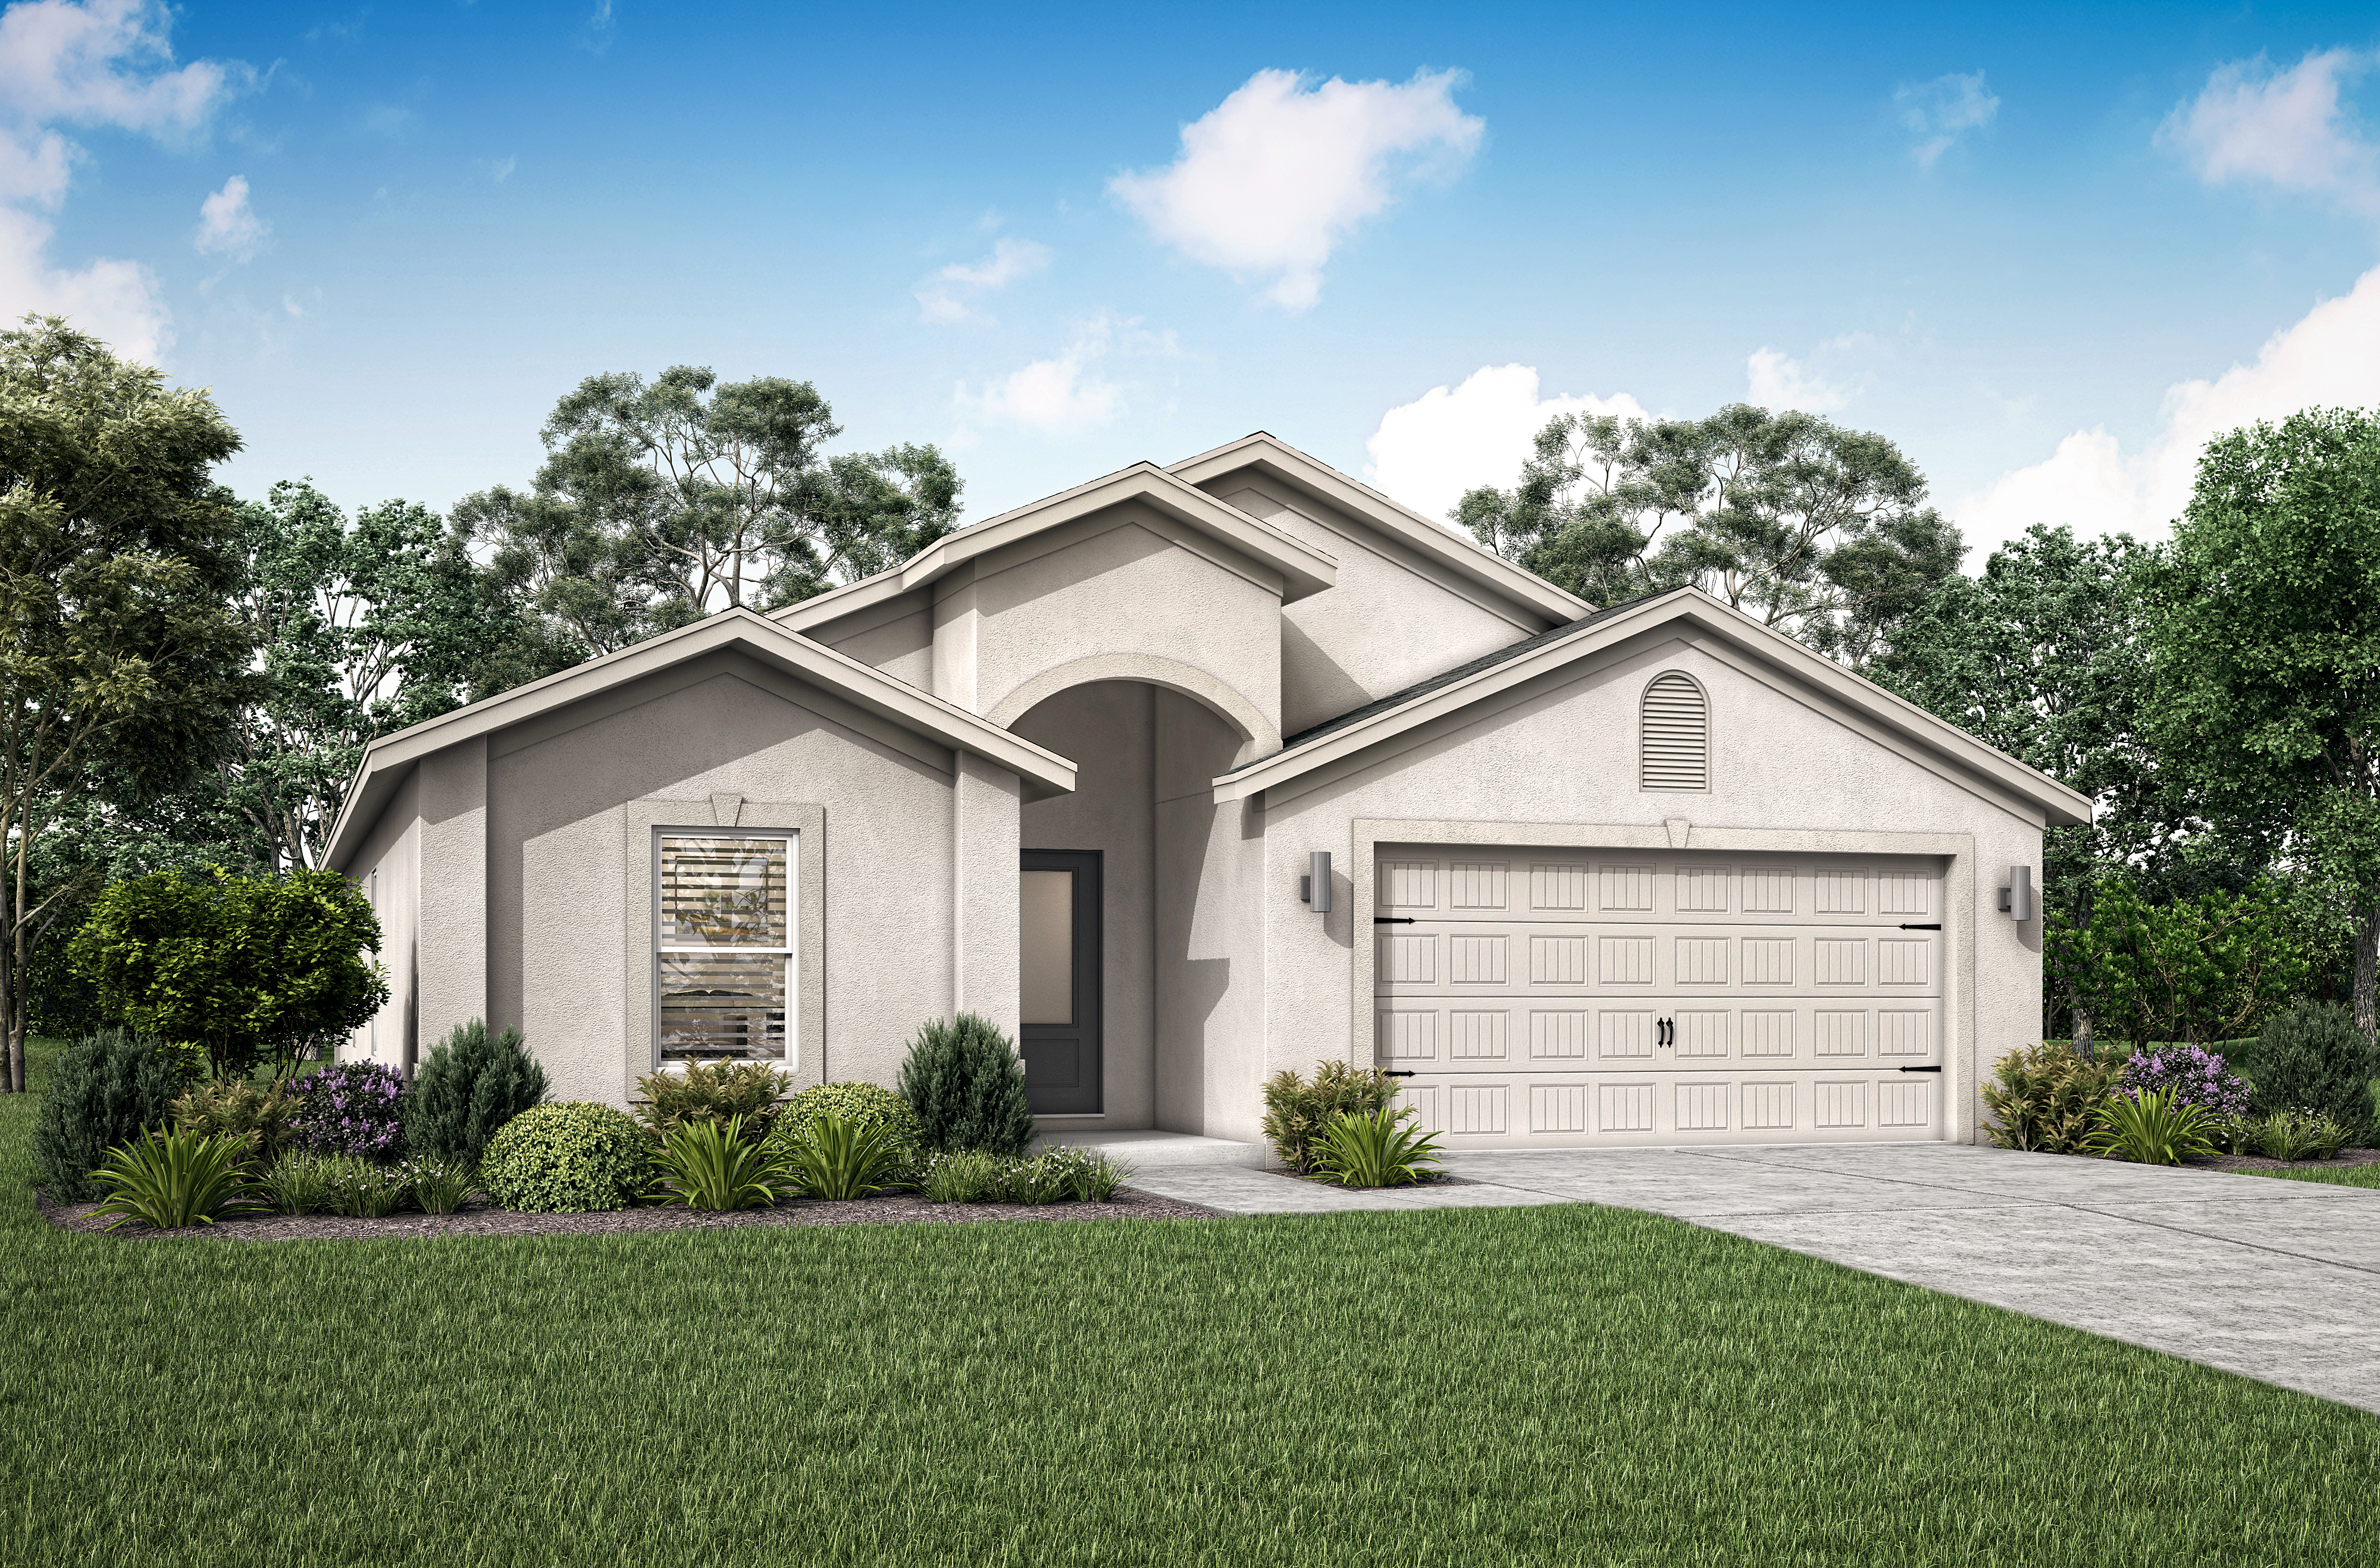 Liberty Shores by LGI Homes features three to five bedroom floor plans with two and three bathrooms.